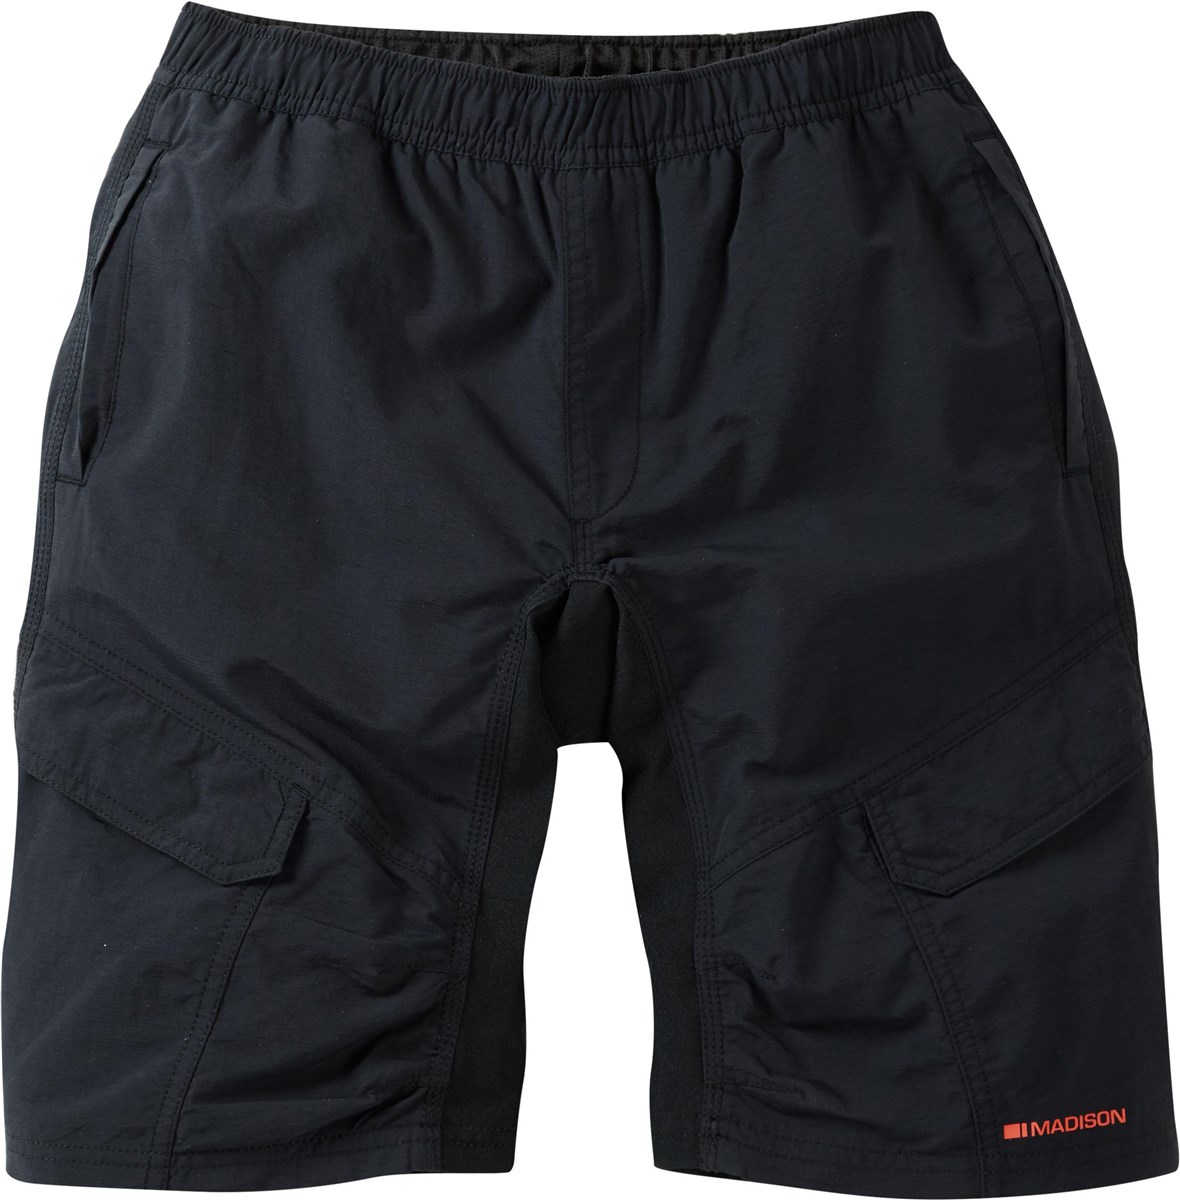 Madison Trail Youth Baggy Cycling Shorts product image